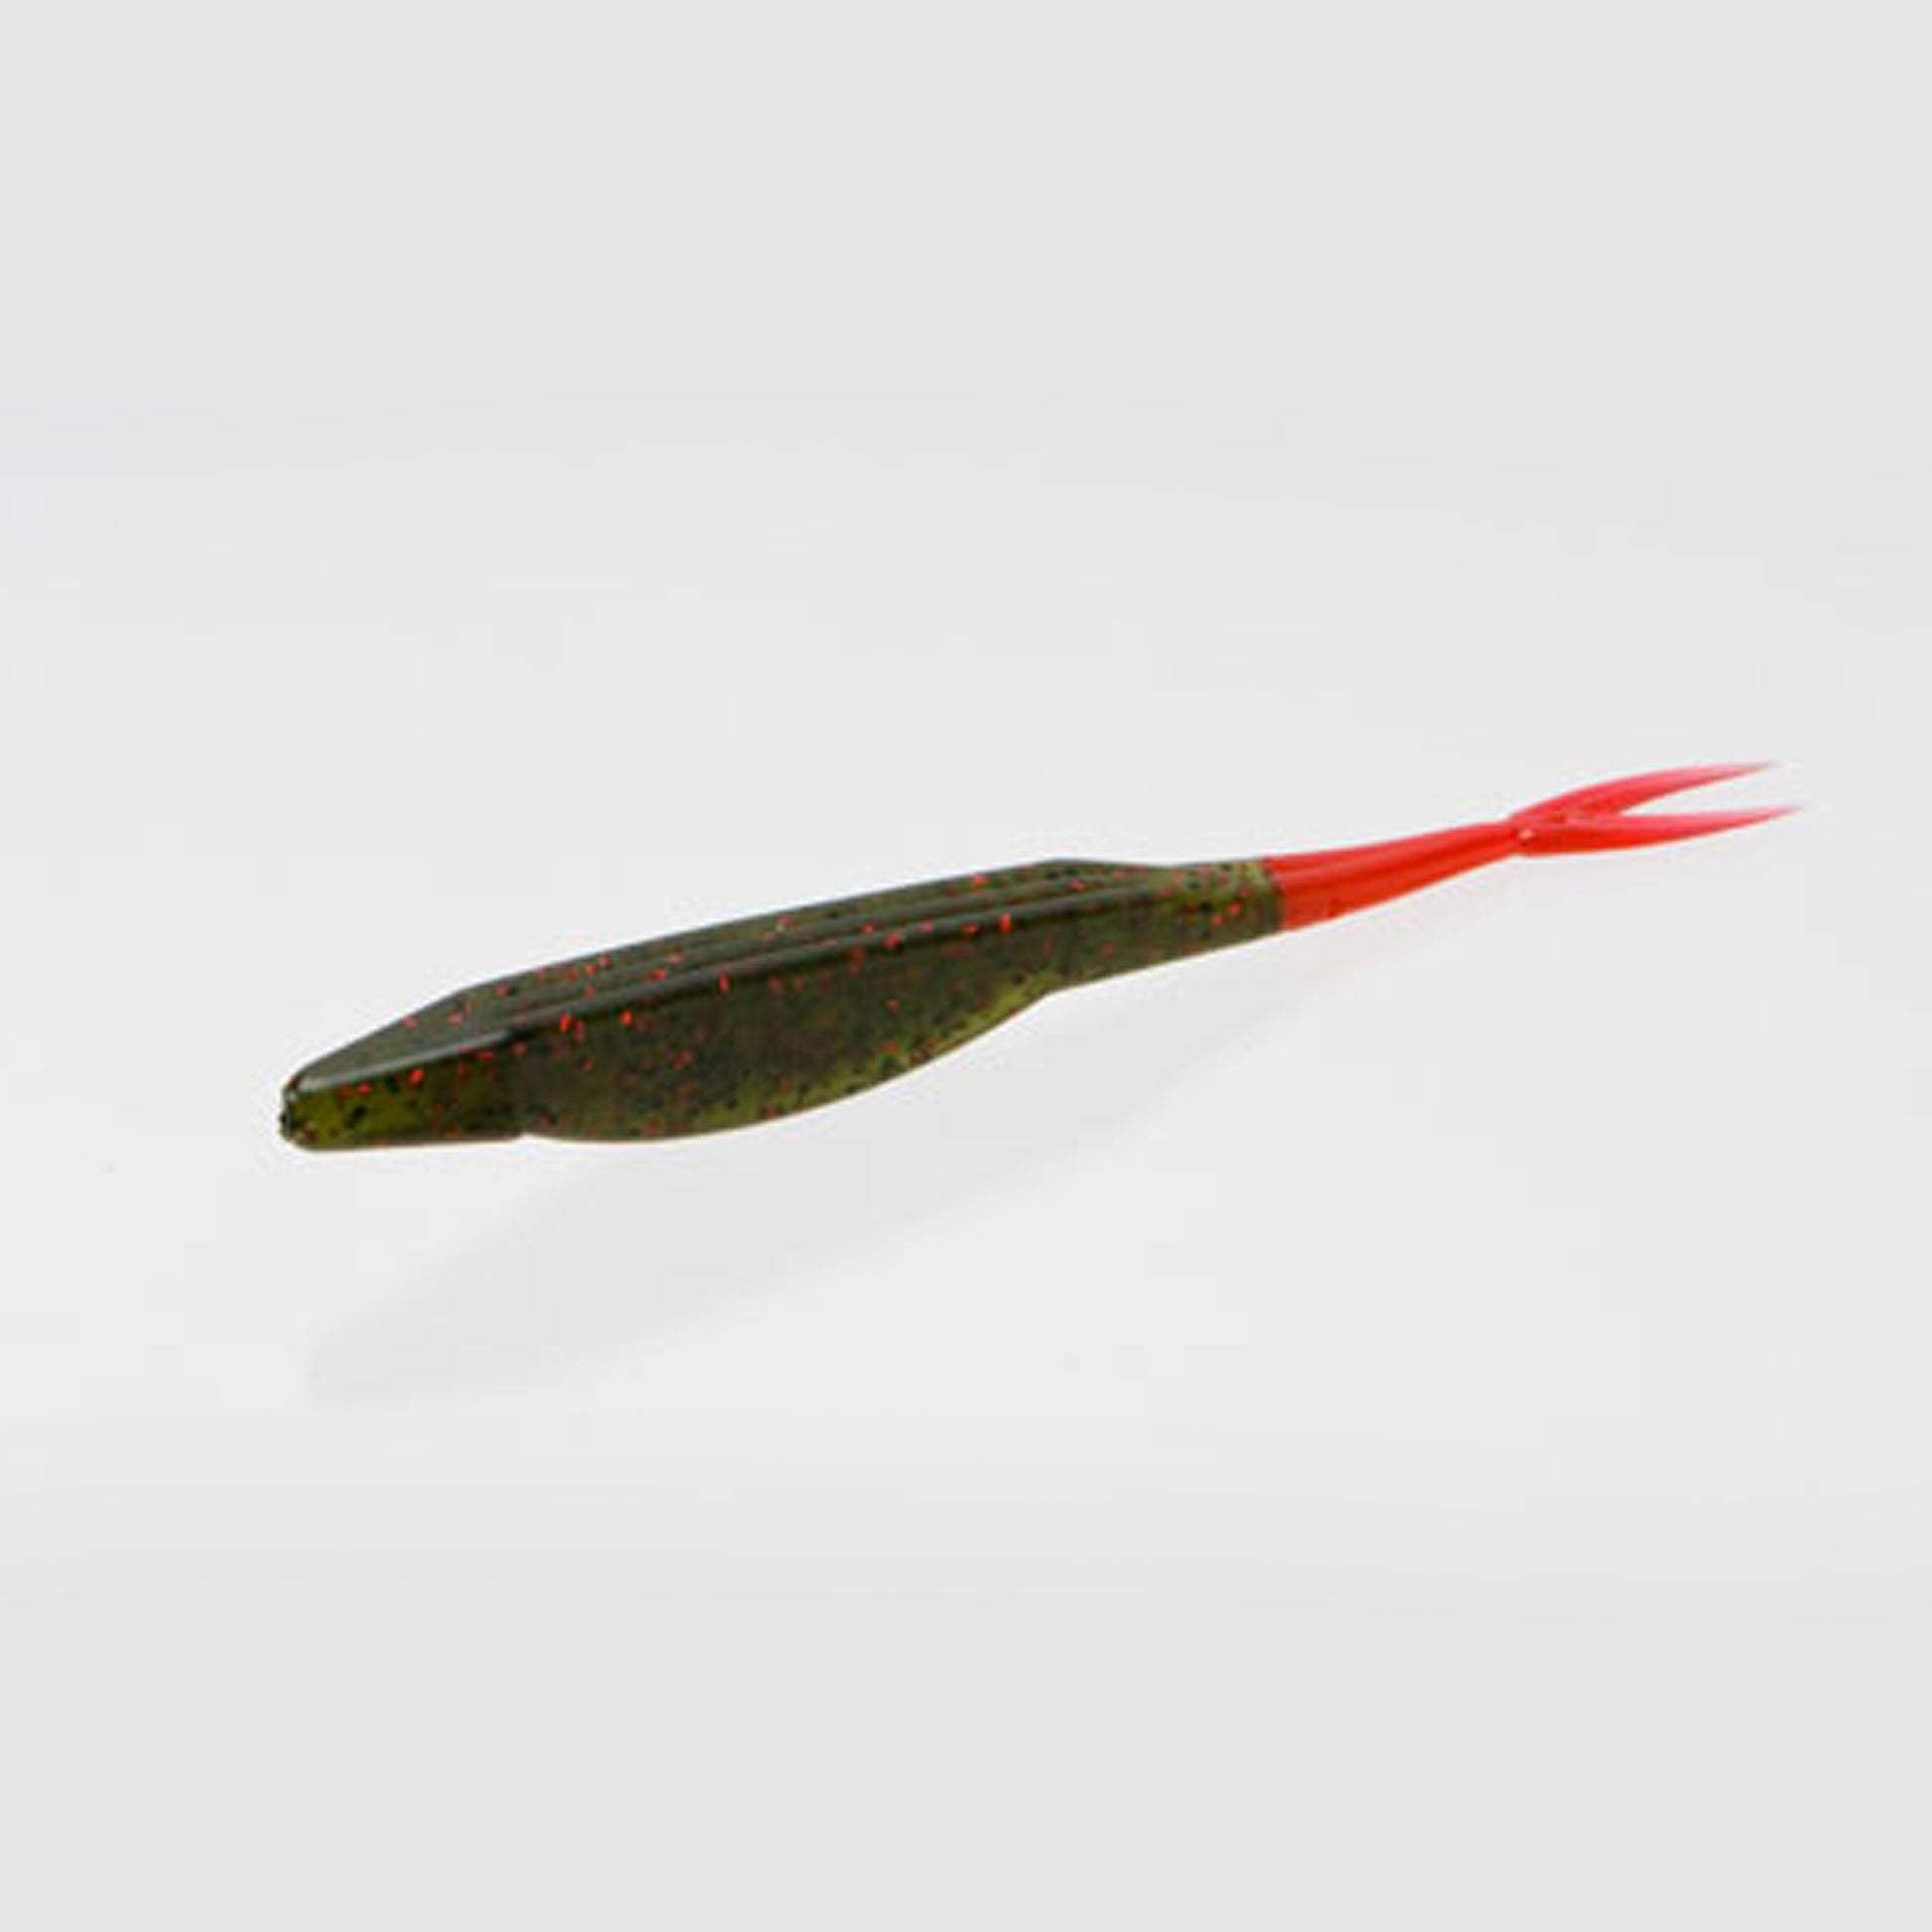  Zoom Bait Salty Super Fluke Bait-Pack of 10 (Avocado Red Tail,  5-Inch) : Artificial Fishing Bait : Sports & Outdoors